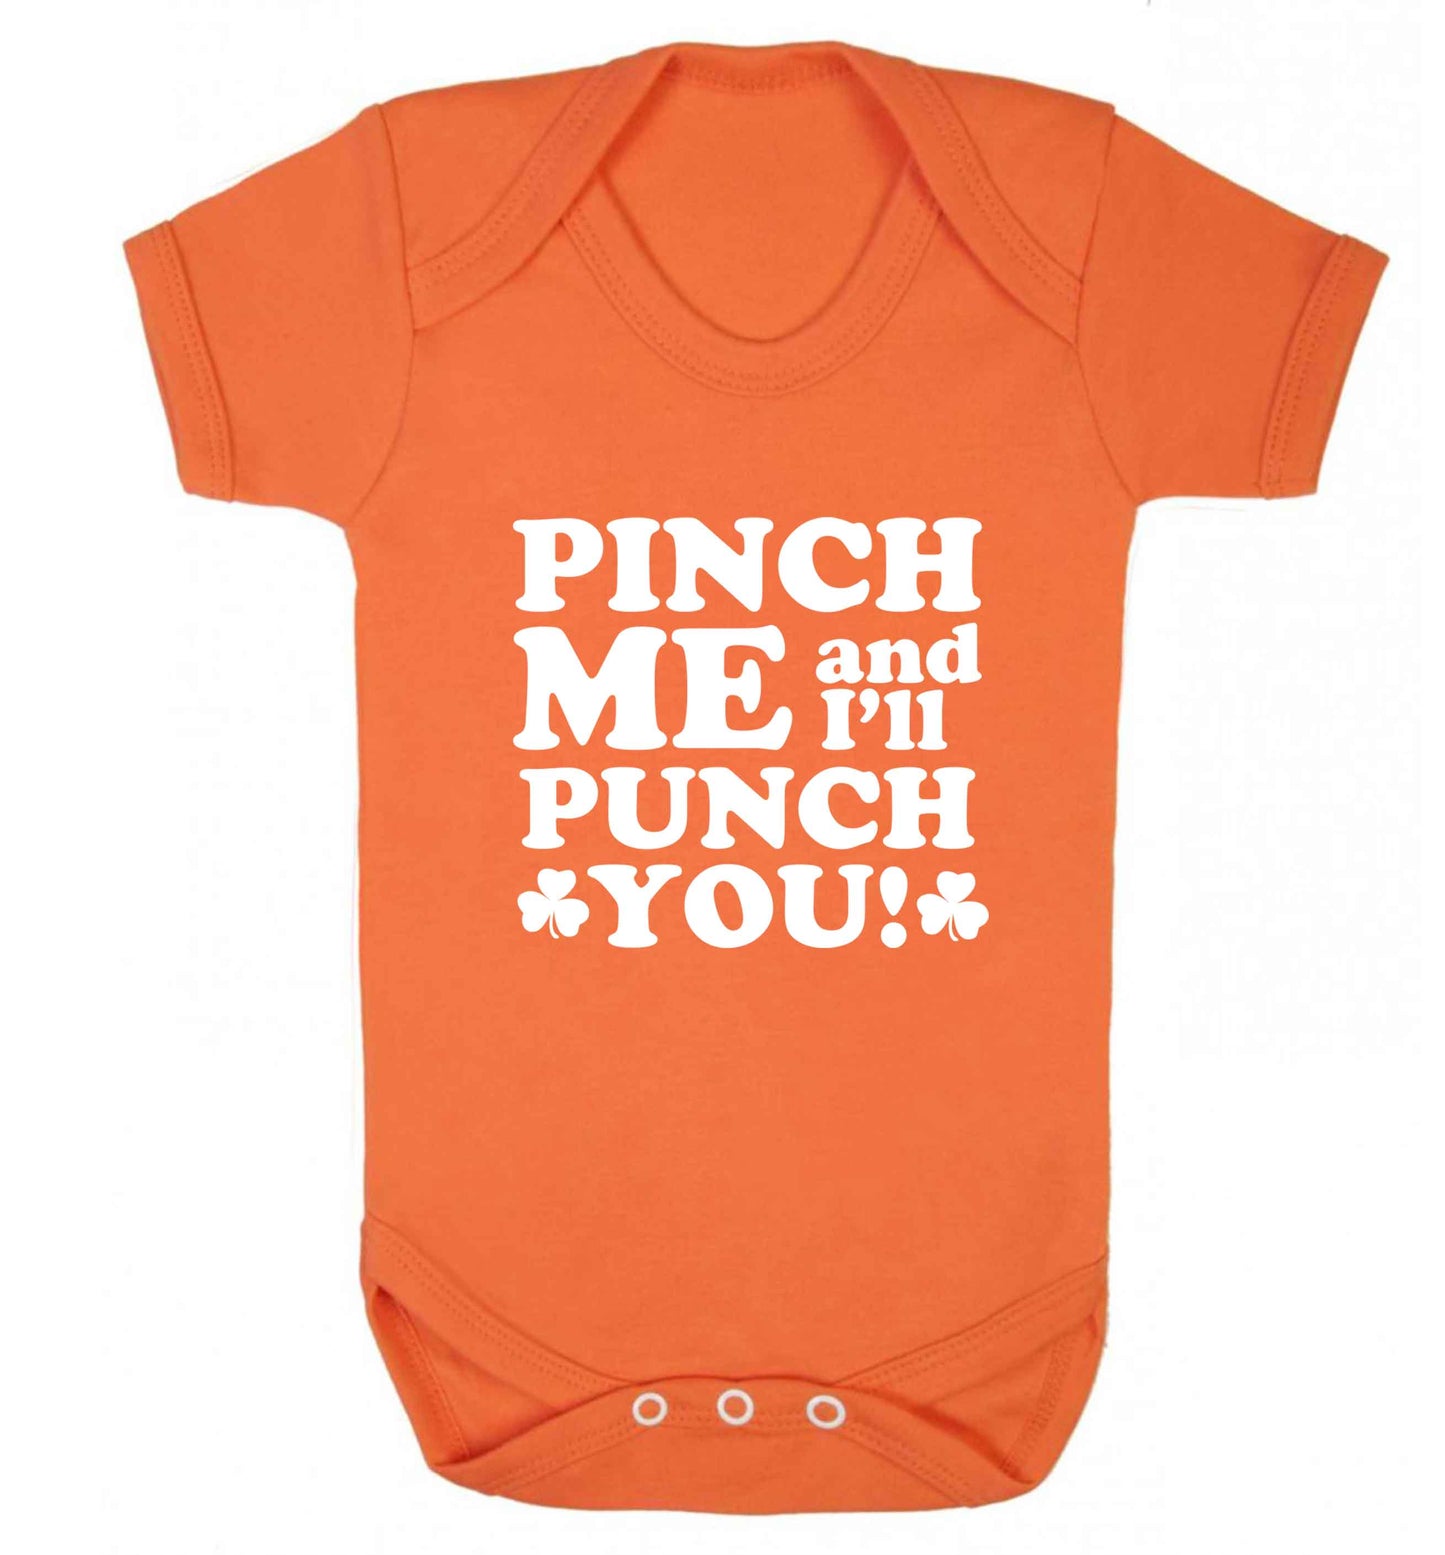 Pinch me and I'll punch you baby vest orange 18-24 months